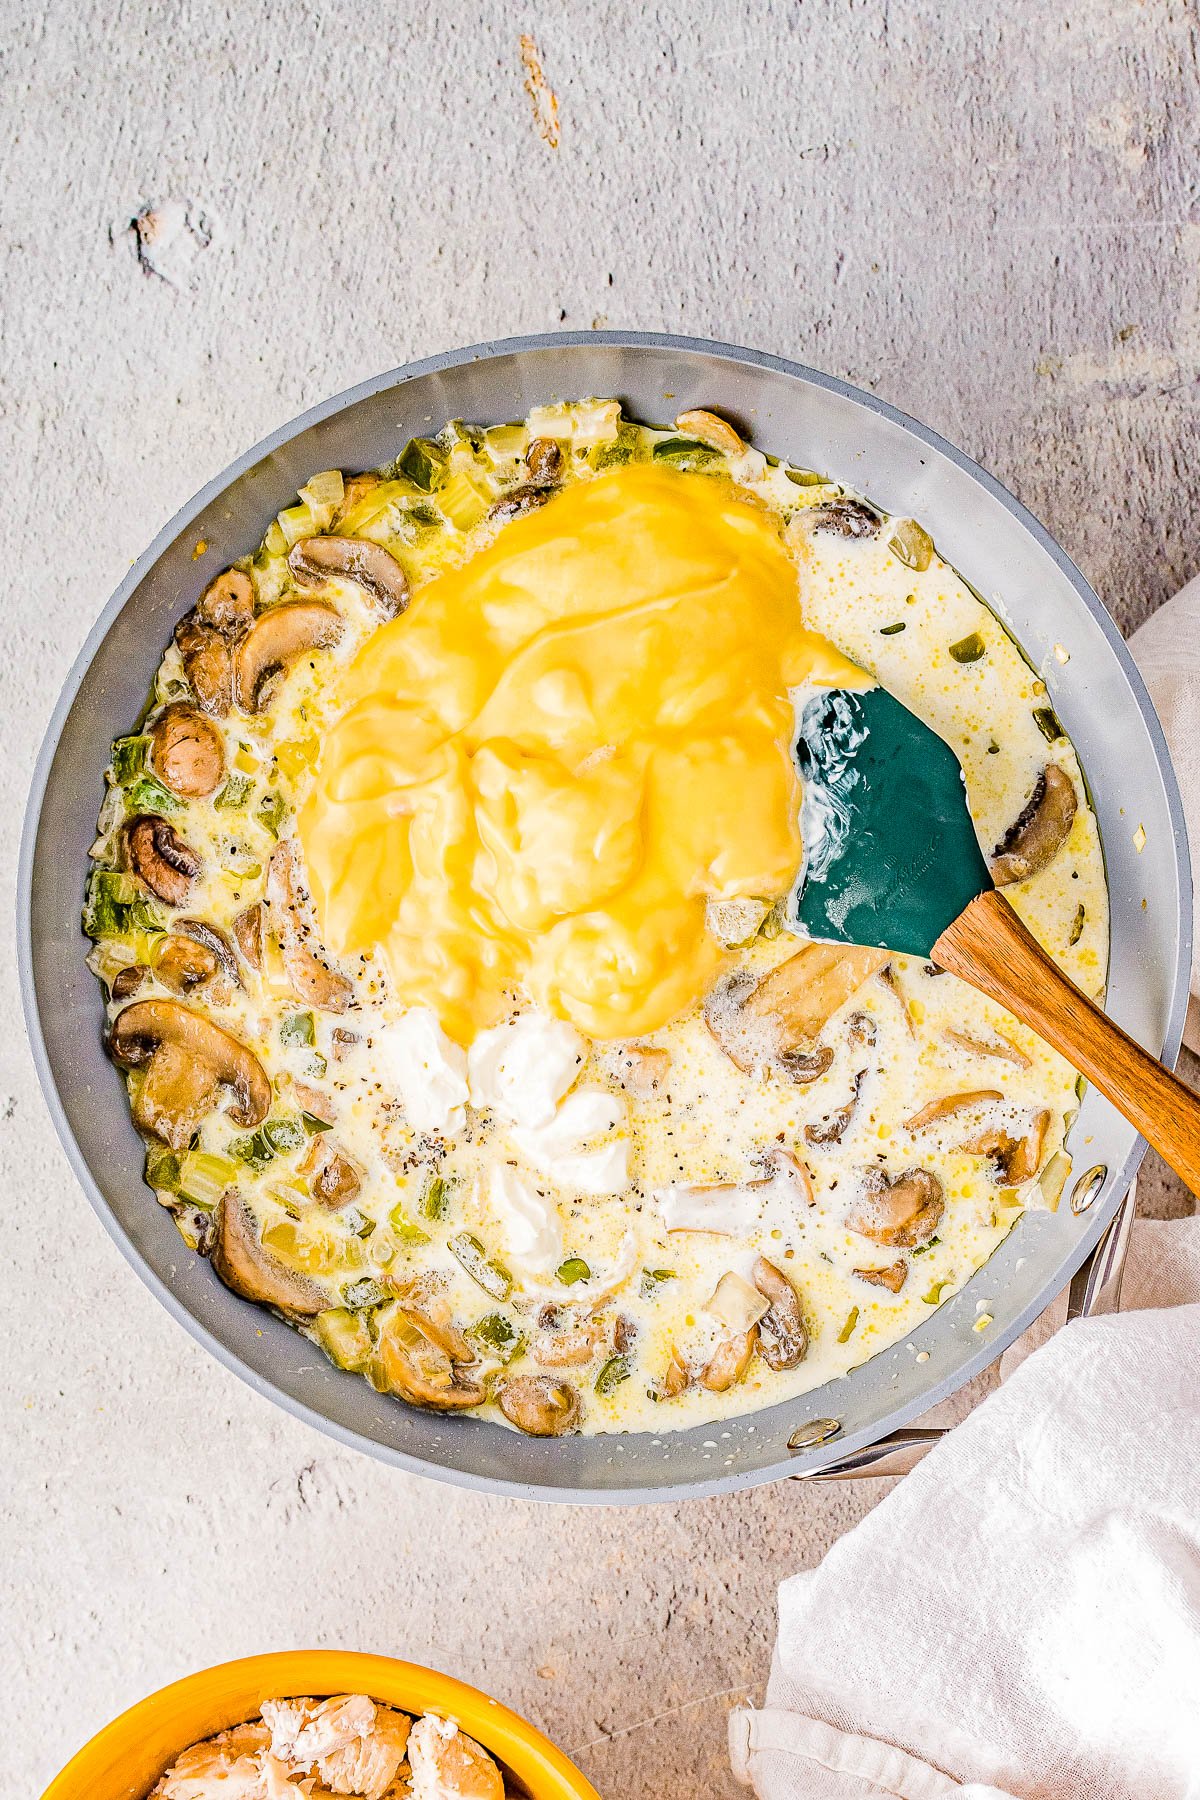 Turkey Tetrazzini - Wondering what to do with your leftover Thanksgiving turkey? This rich casserole features al dente spaghetti, a decadent cream sauce, tender vegetables, cheese, and of course your extra turkey! It's EASY to make and may be even better than your Thanksgiving feast! You can also sub leftover chicken or rotisserie chicken!